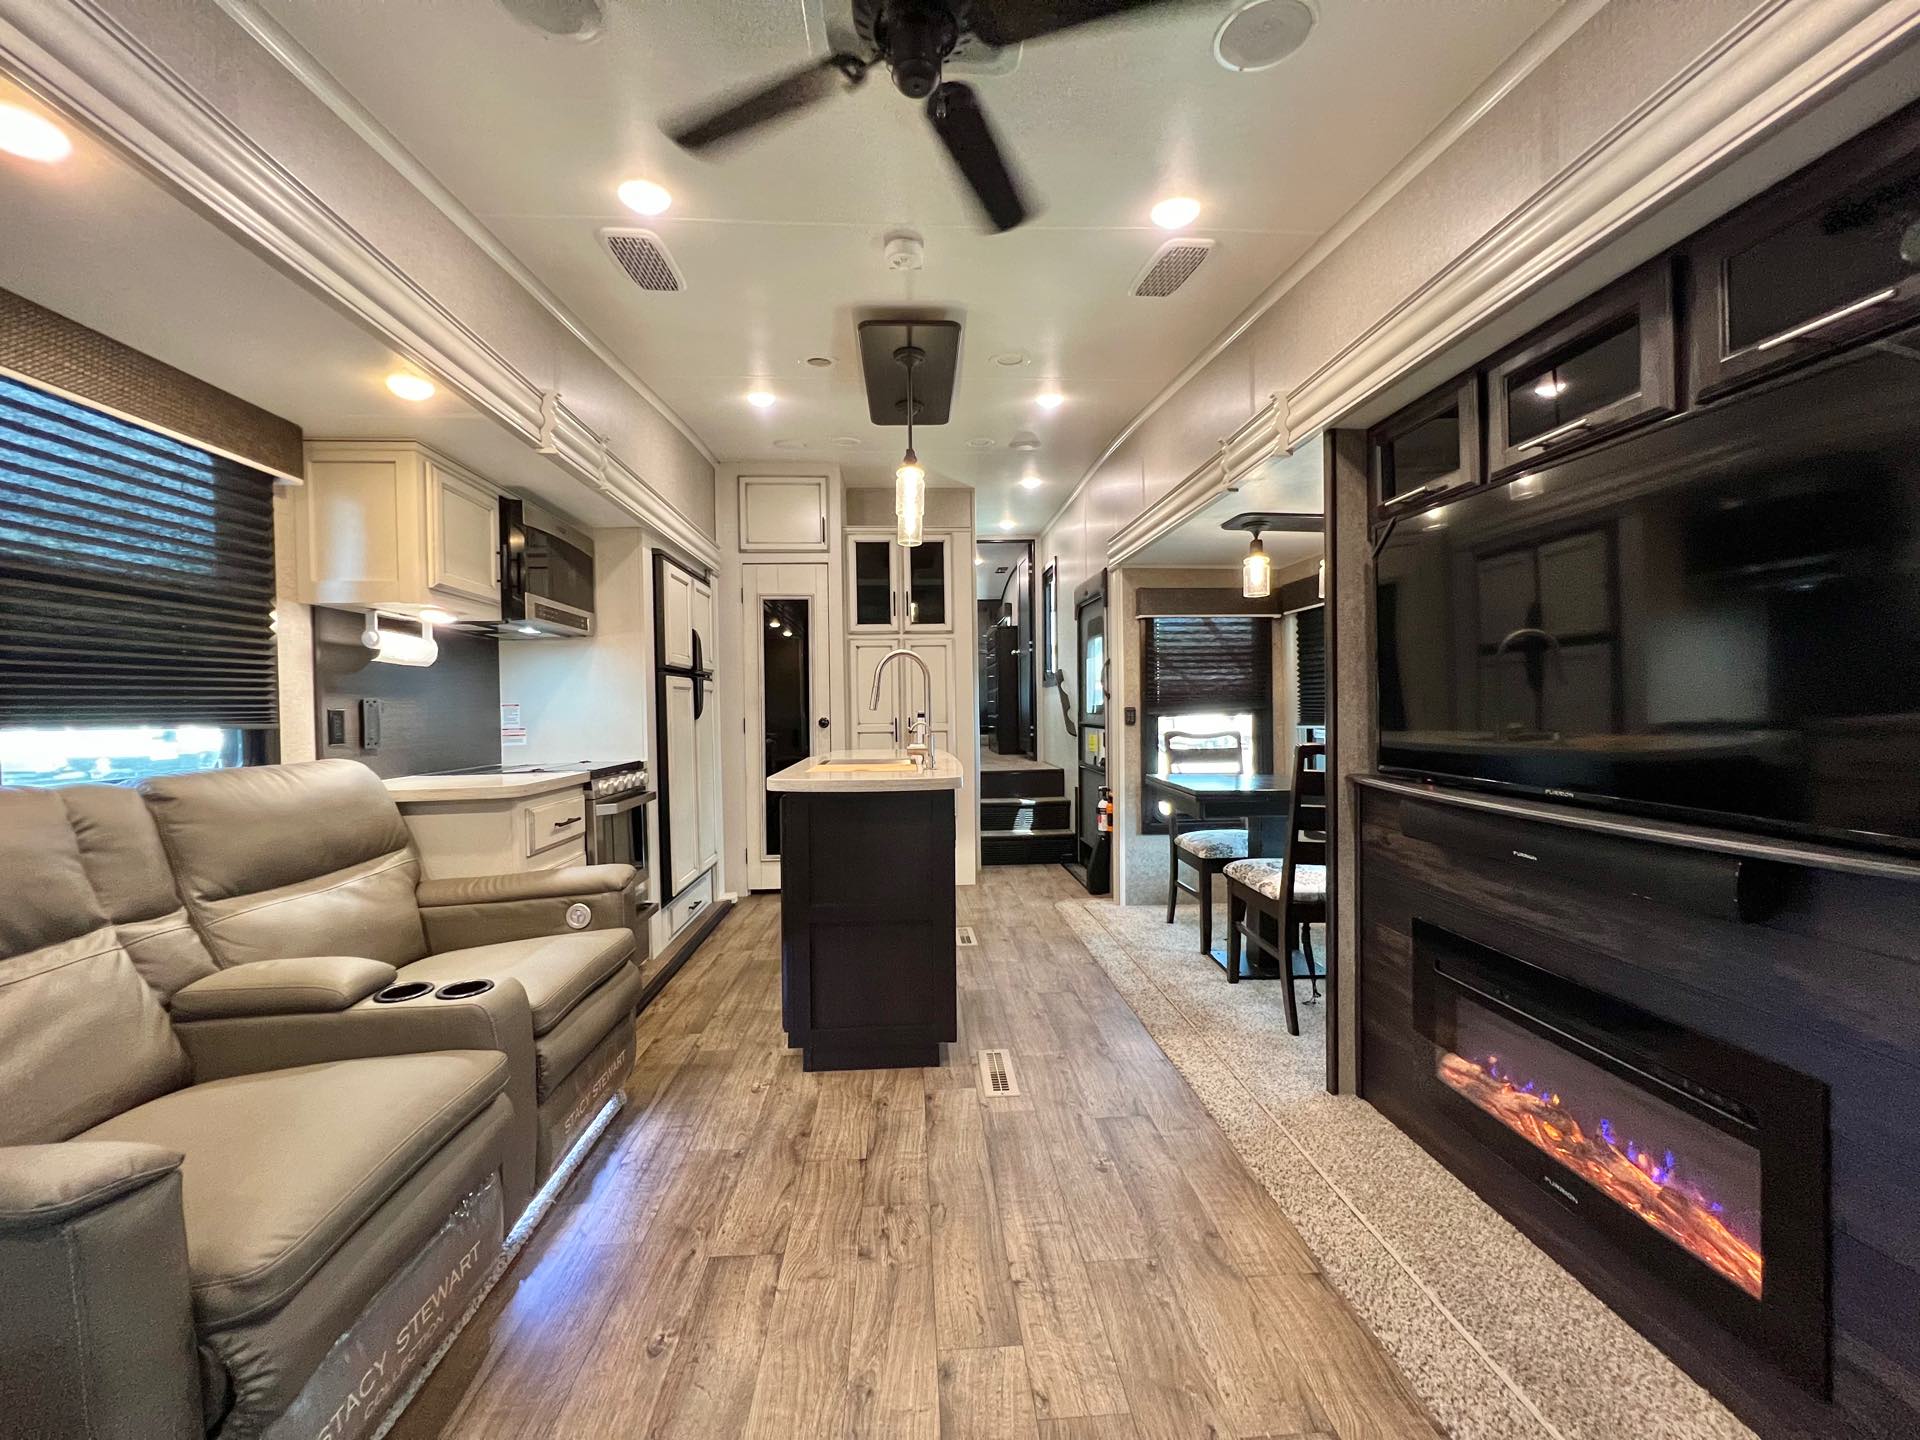 2020 Jayco Eagle 317RLOK at Lee's Country RV